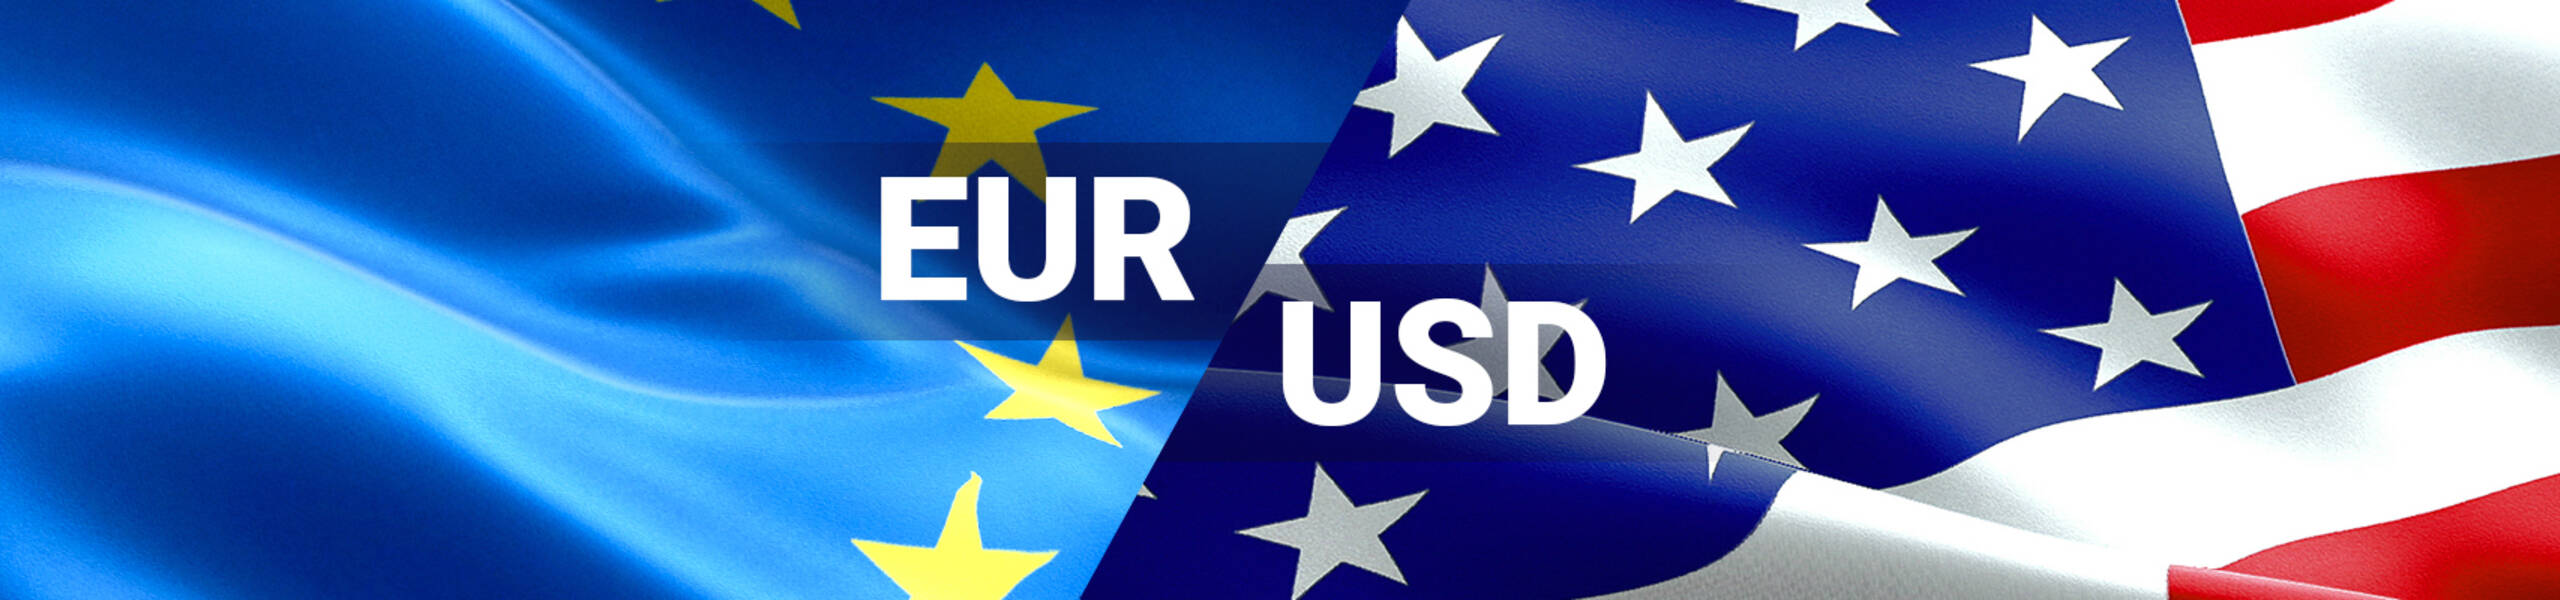 EUR/USD: еuro tested the borders of consolidation range